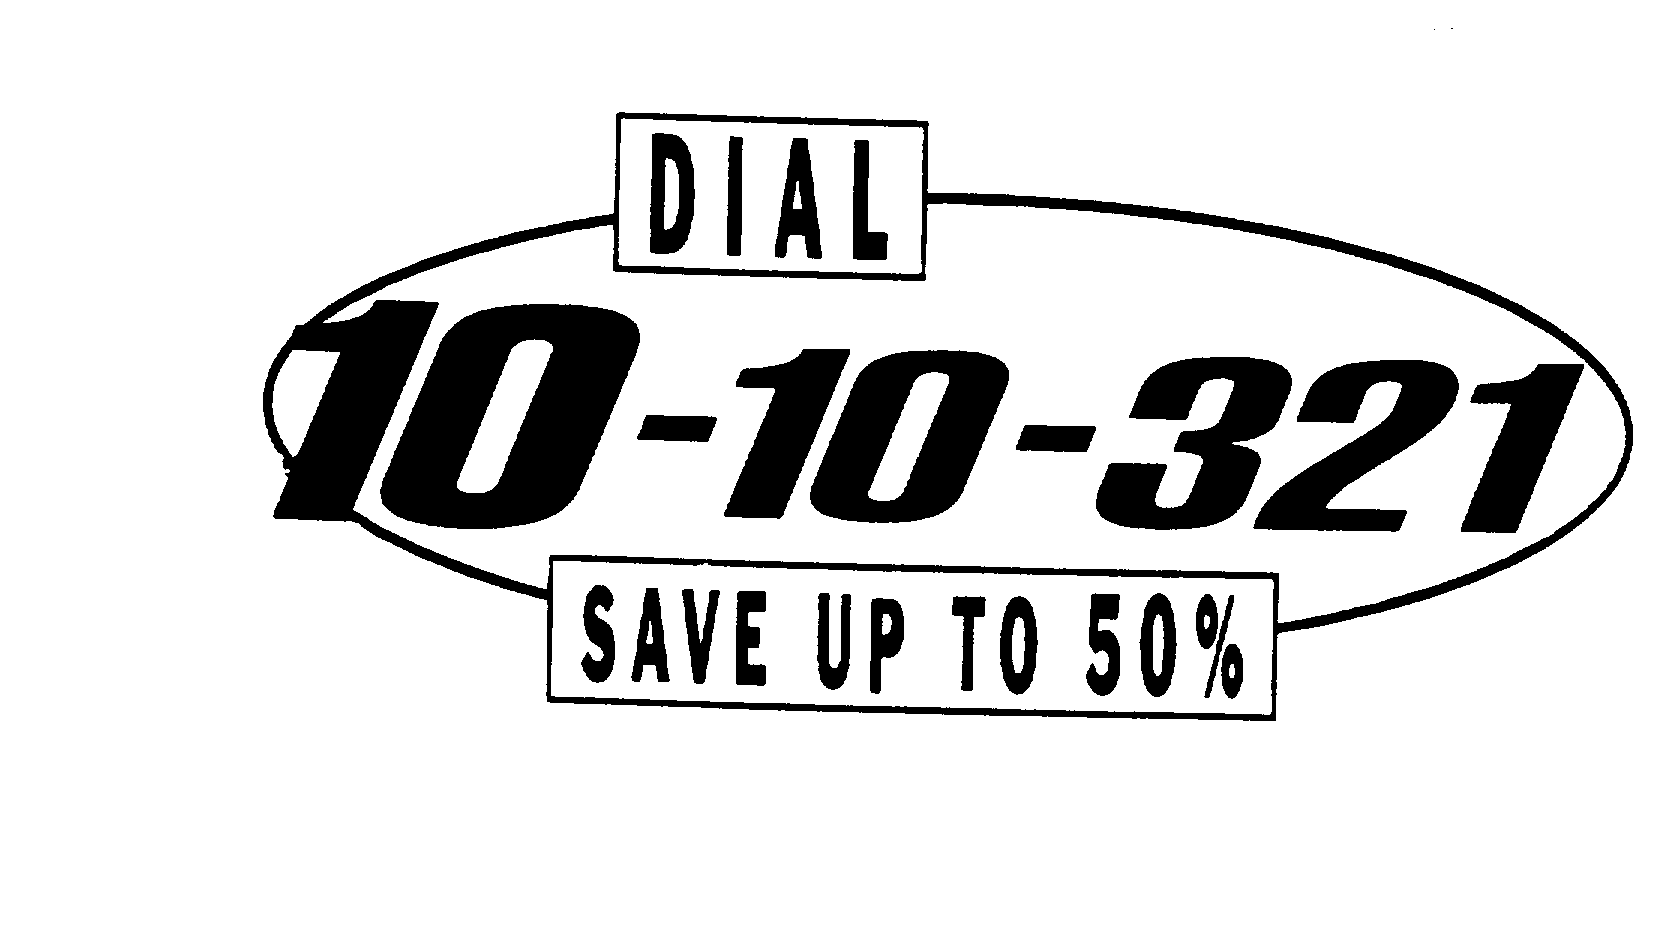  DIAL 10-10-321 SAVE UP TO 50%